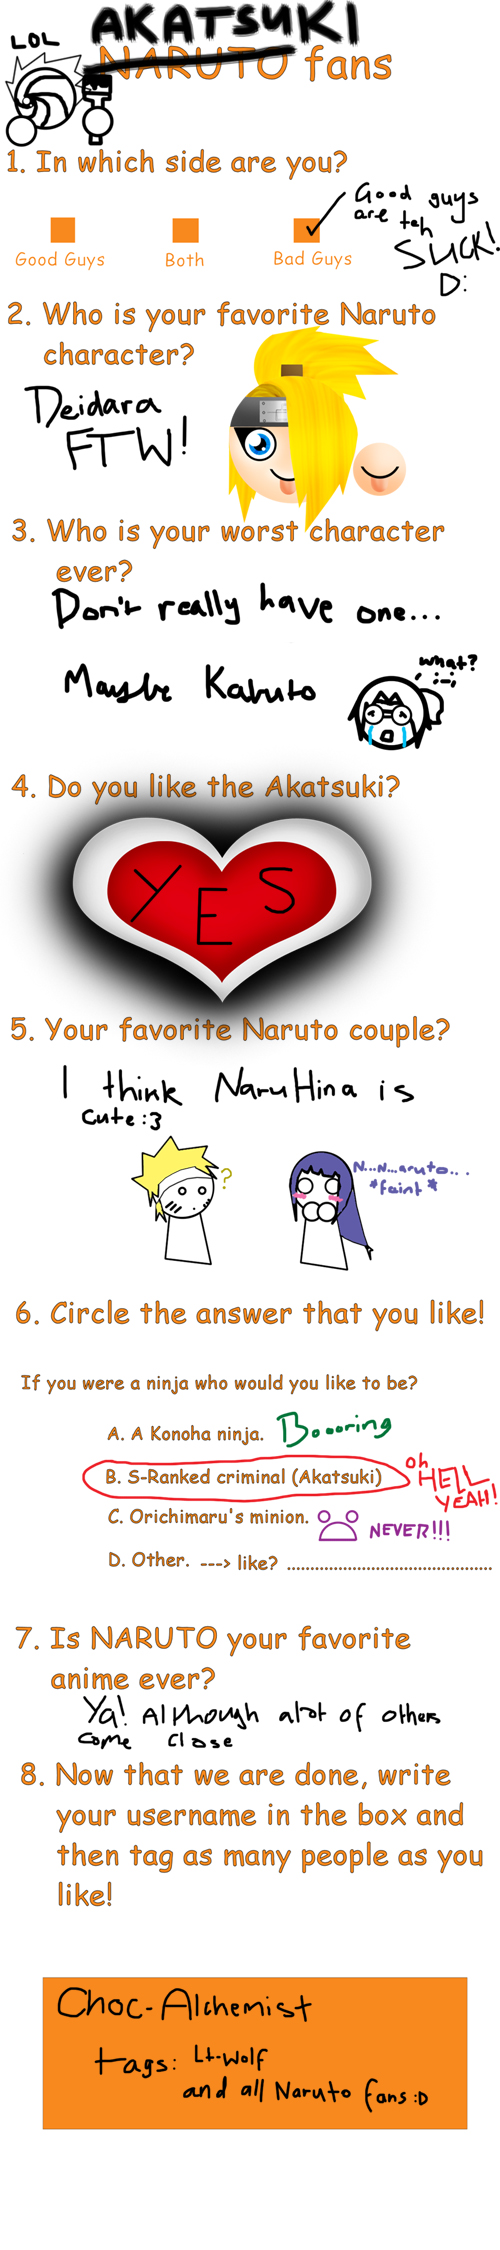 Naruto Fans Thing by Light_Eco_Gal